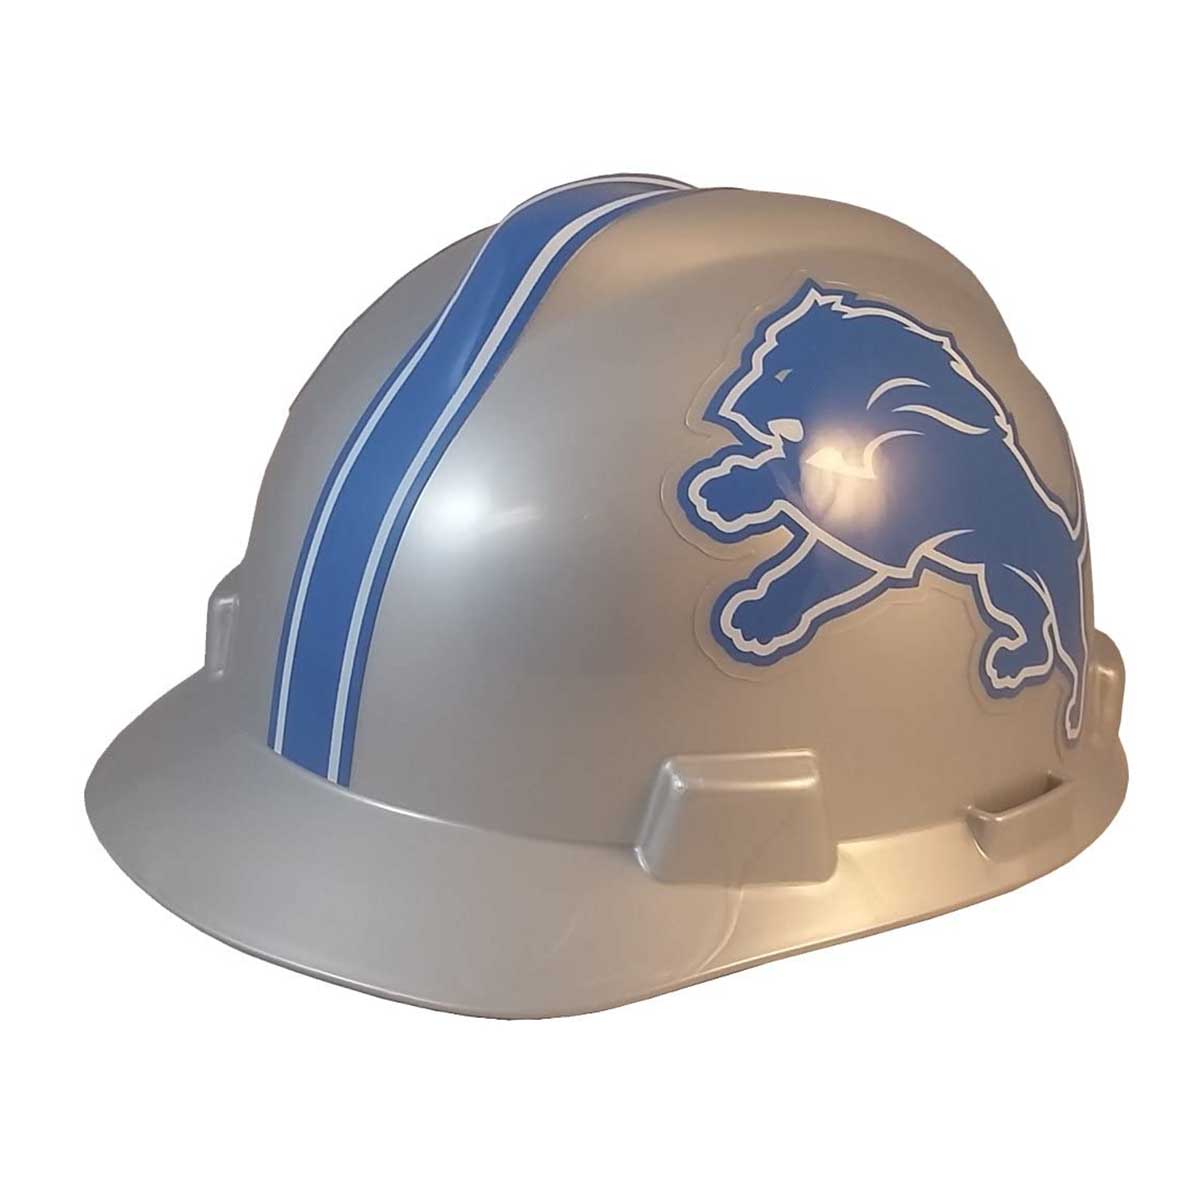 Fan's Hard Hat - support your belowed team at work. 